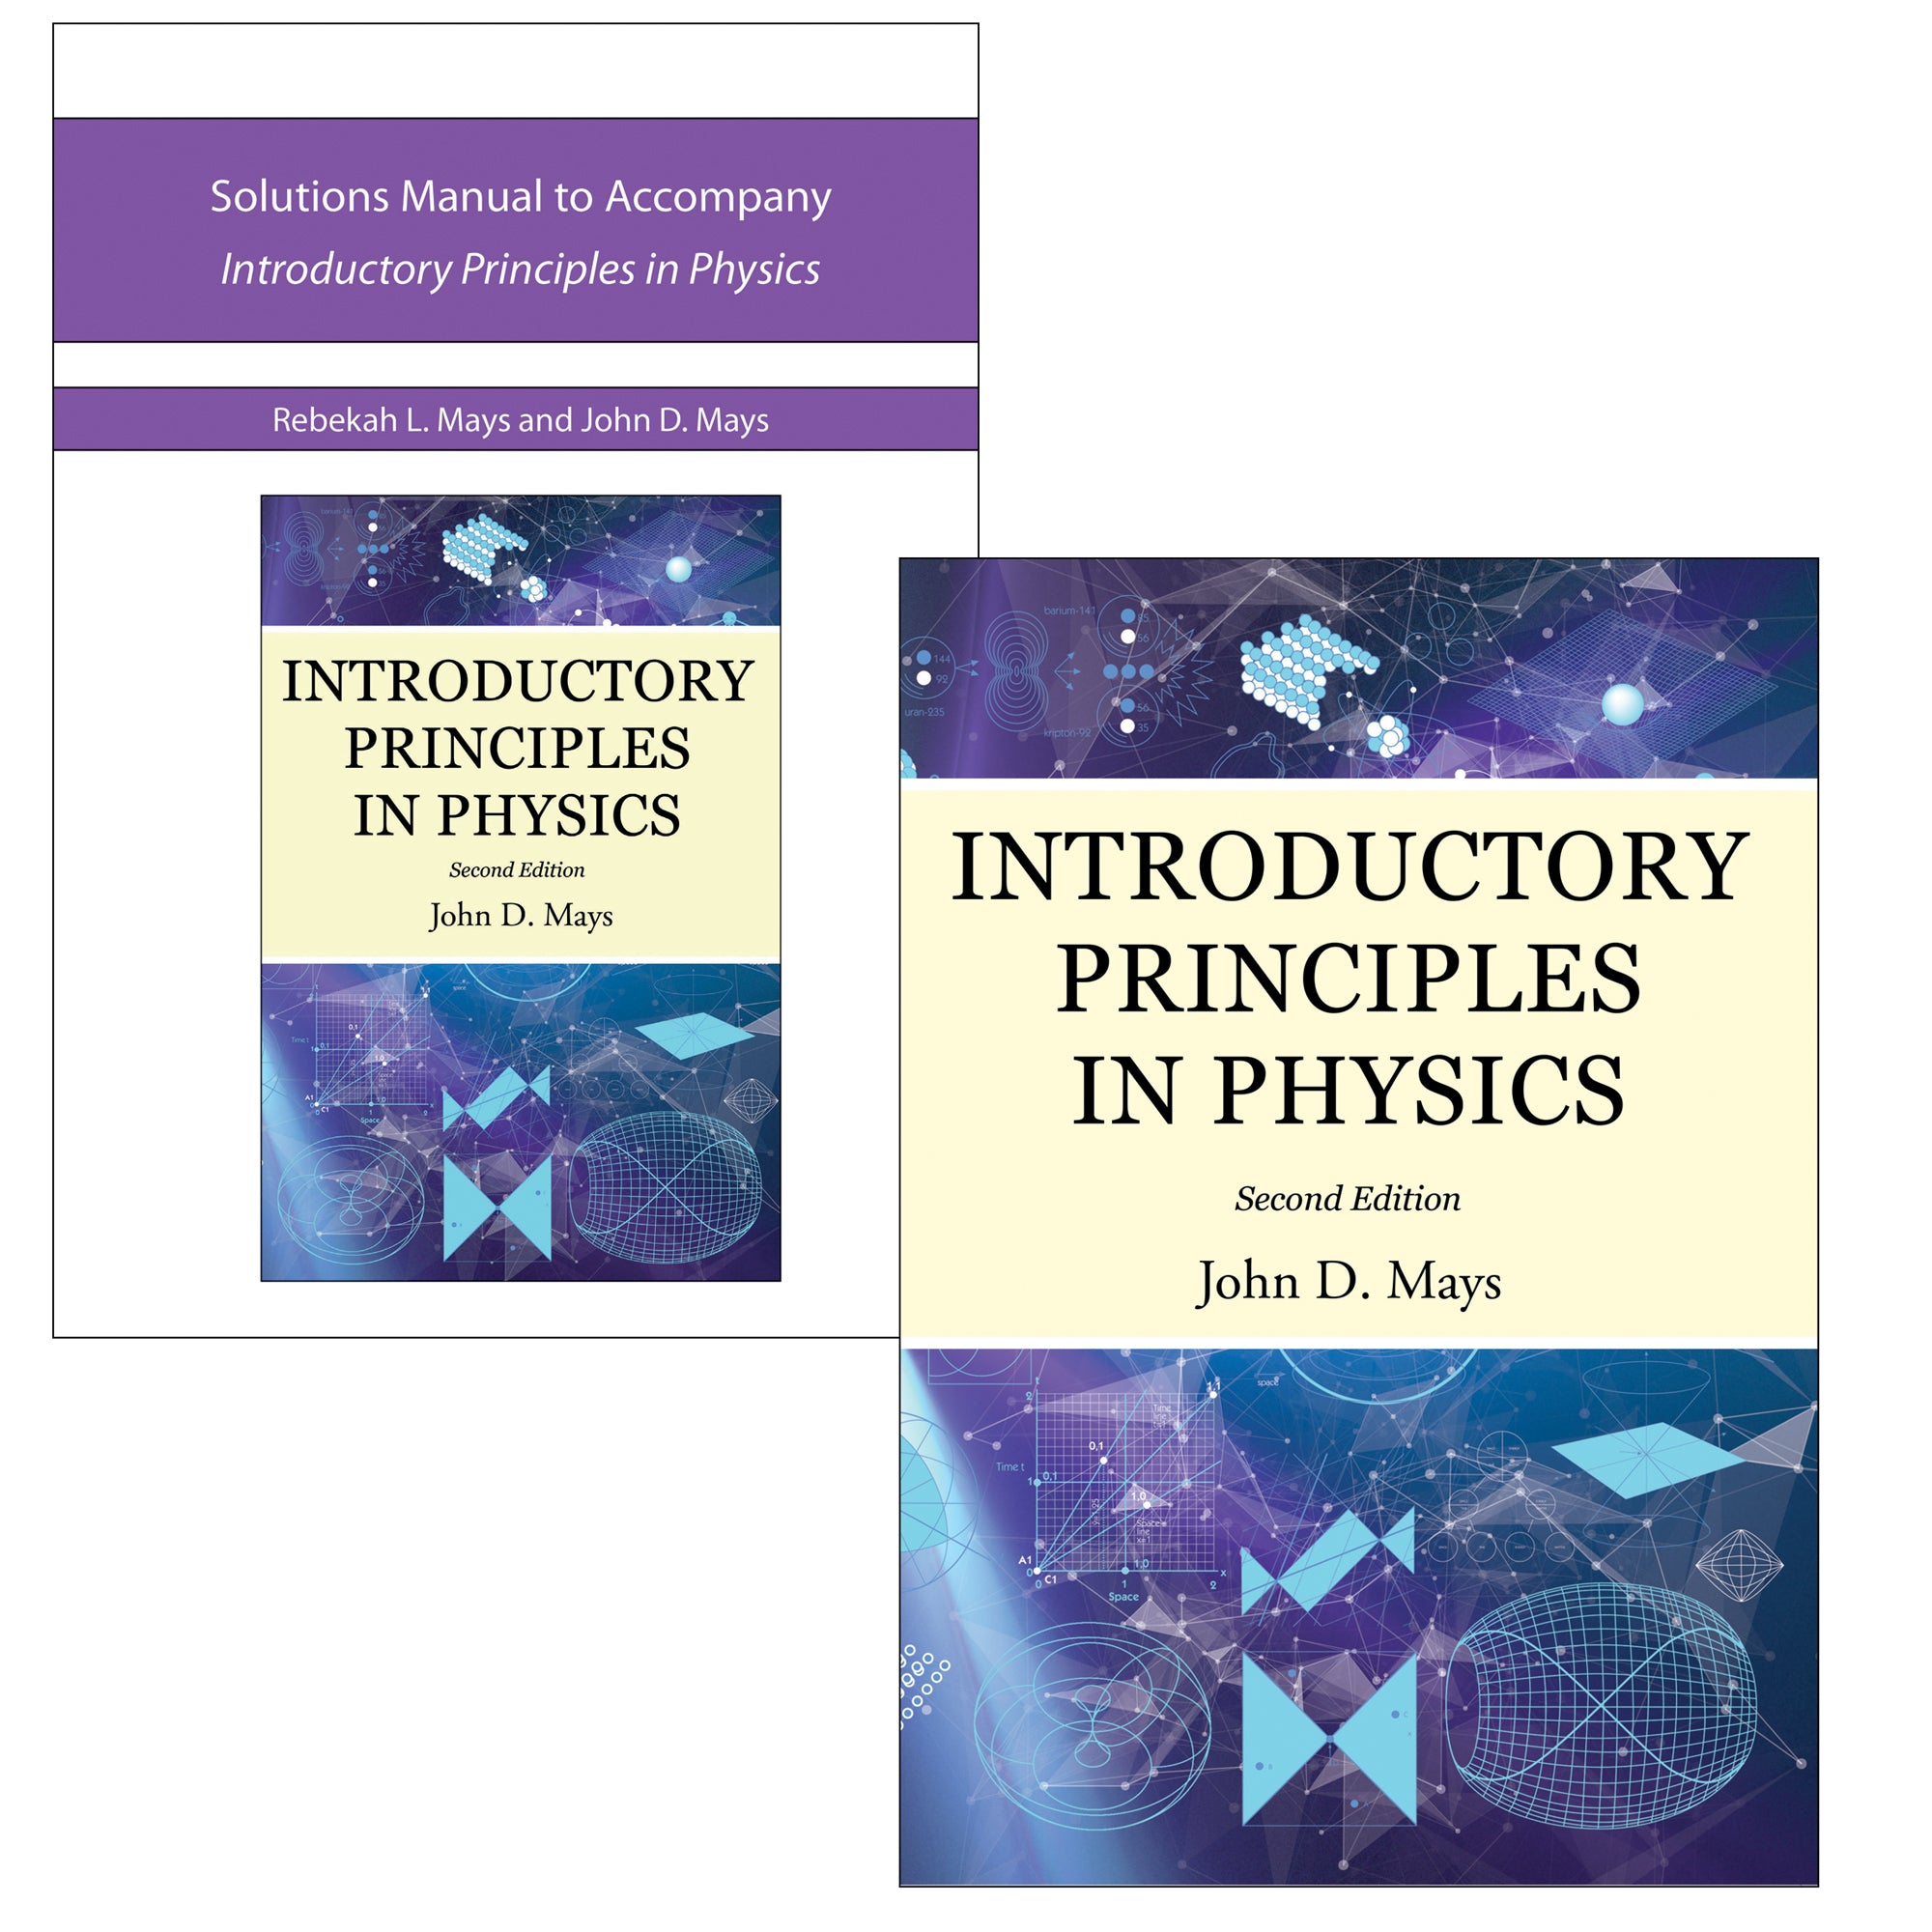 A set of 2 books; Introductory Principles in Physics Solutions Manual on the left and Introductory Principles in Physics on the right. Left book is white with purple stripes and an image of the cover of the book on the right. The book on the right shows a background of purples and blues with images of shapes and graphs in light blue and white. In the middle is a cream color with the title and author.